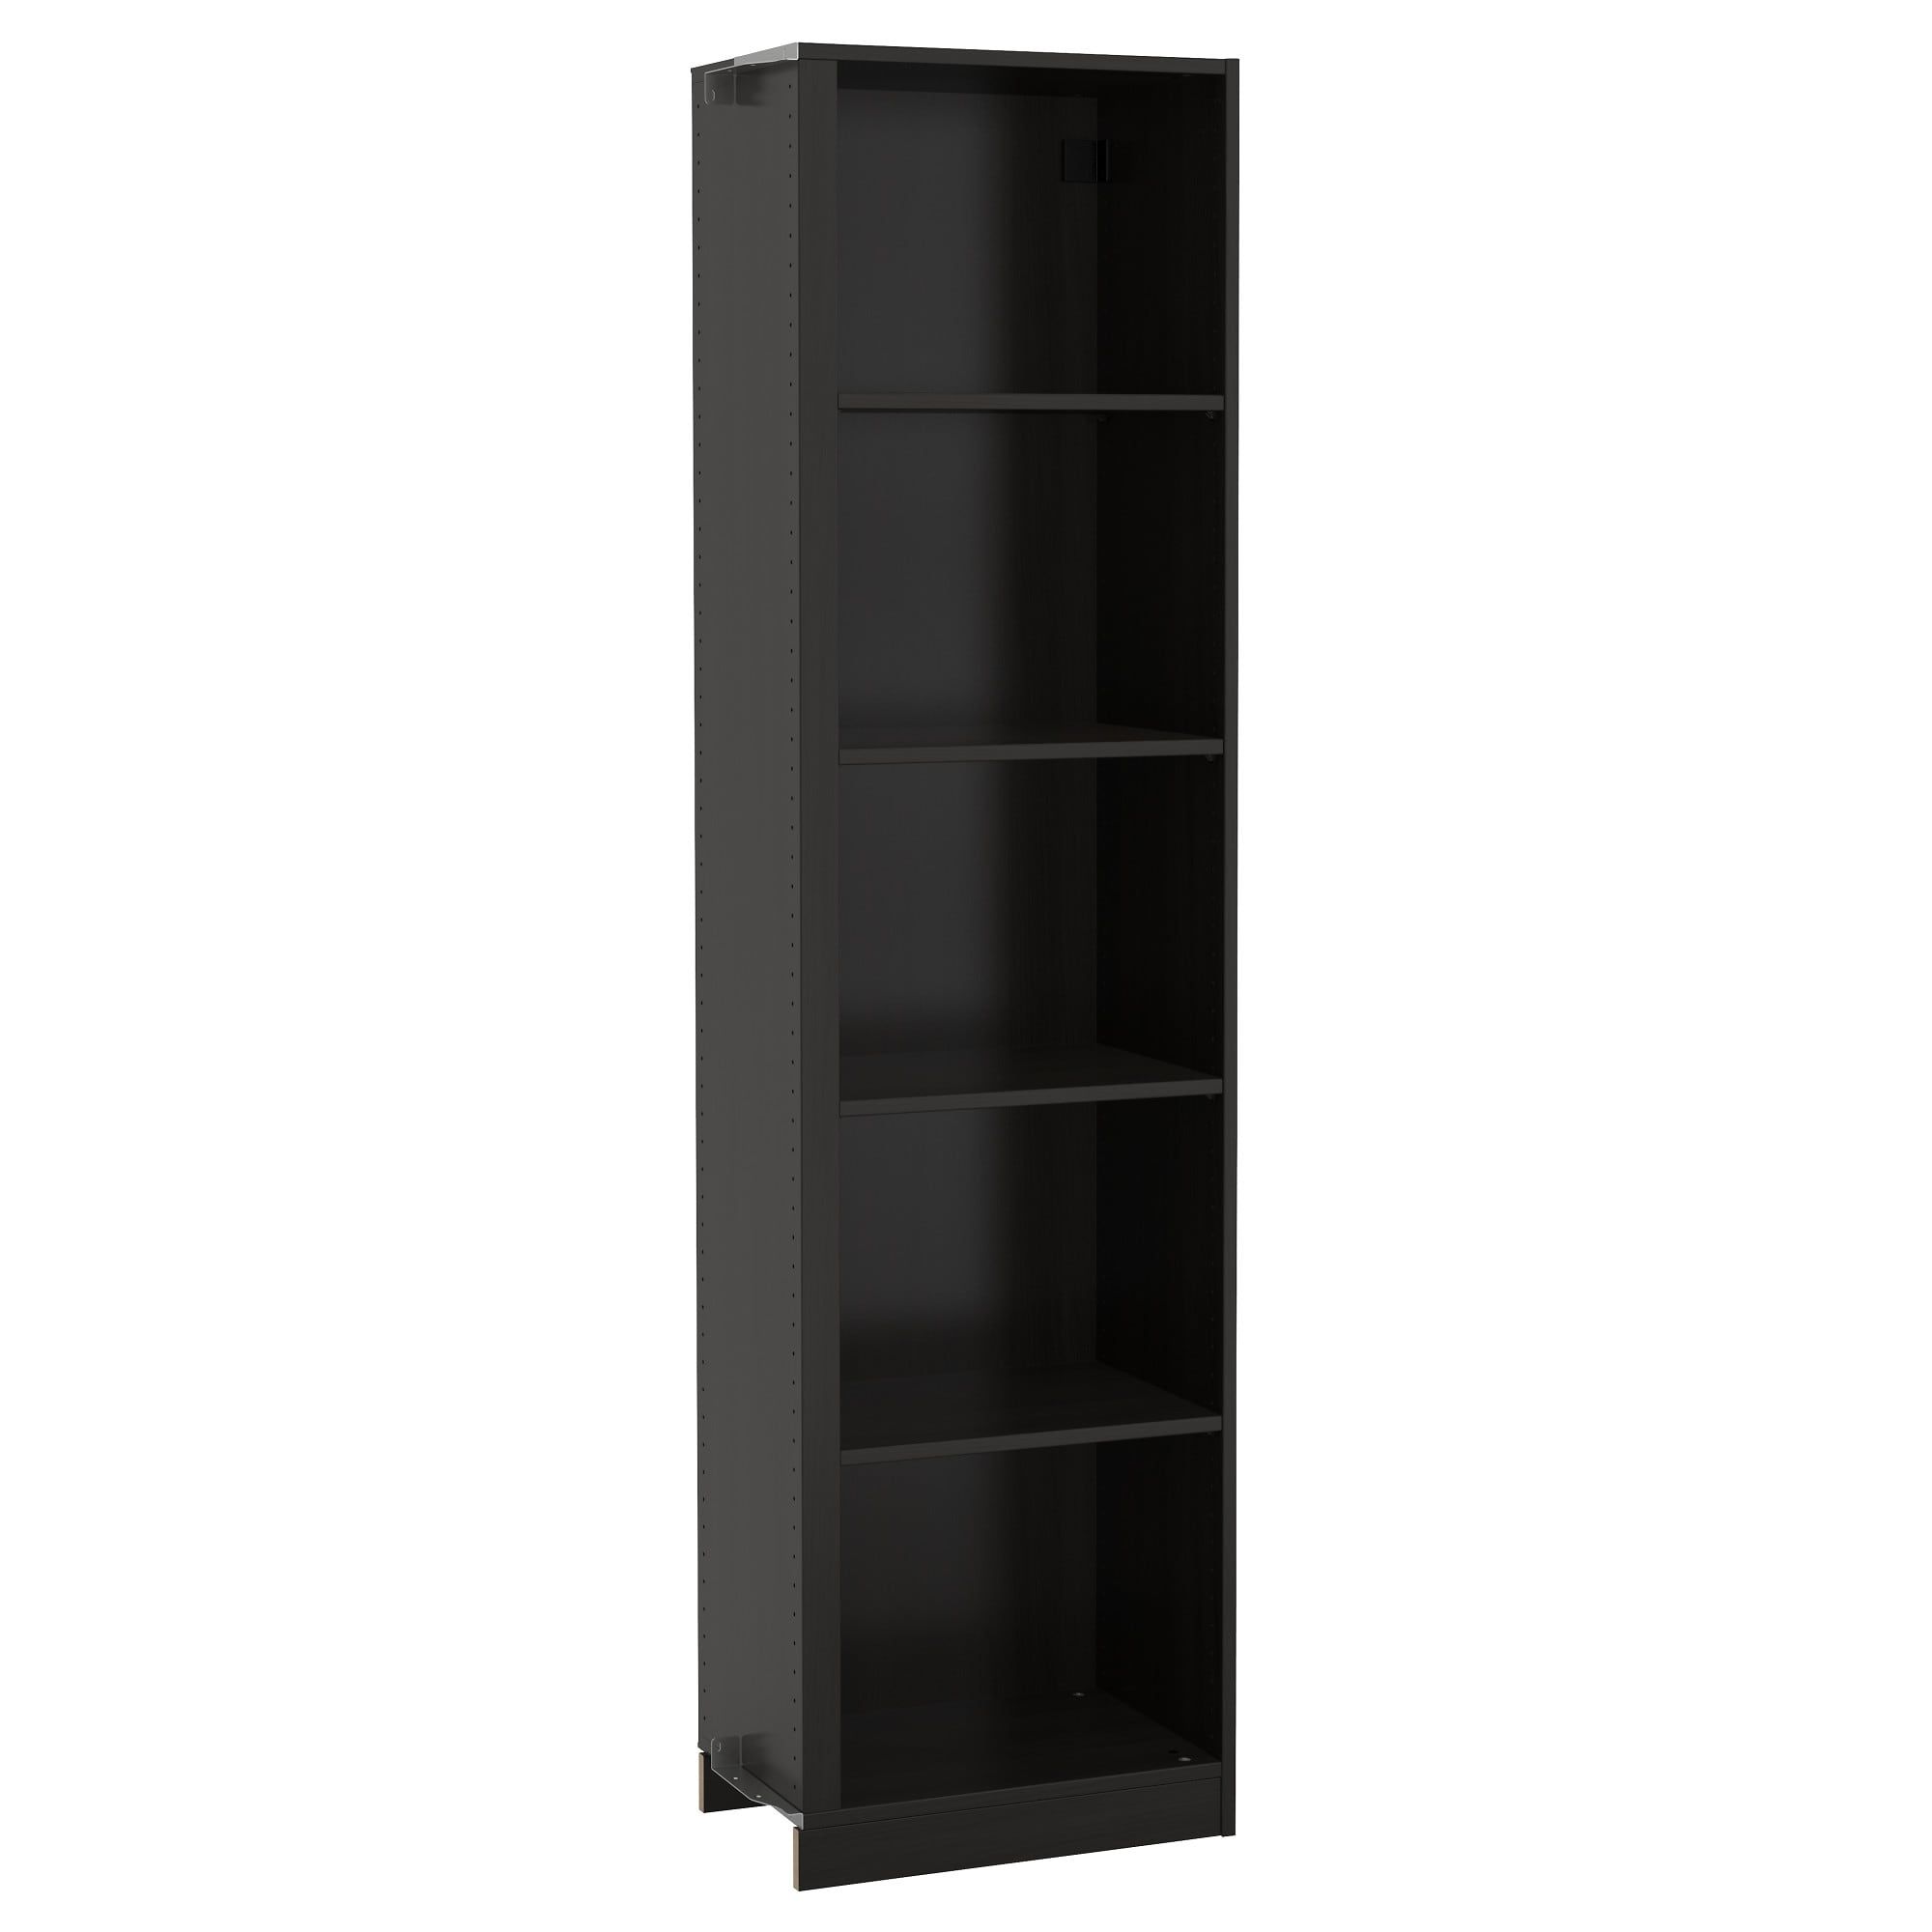 2020 Add On Corner Unit With 4 Shelves Pax Black Brown With Corner Unit Bookcases (View 15 of 20)